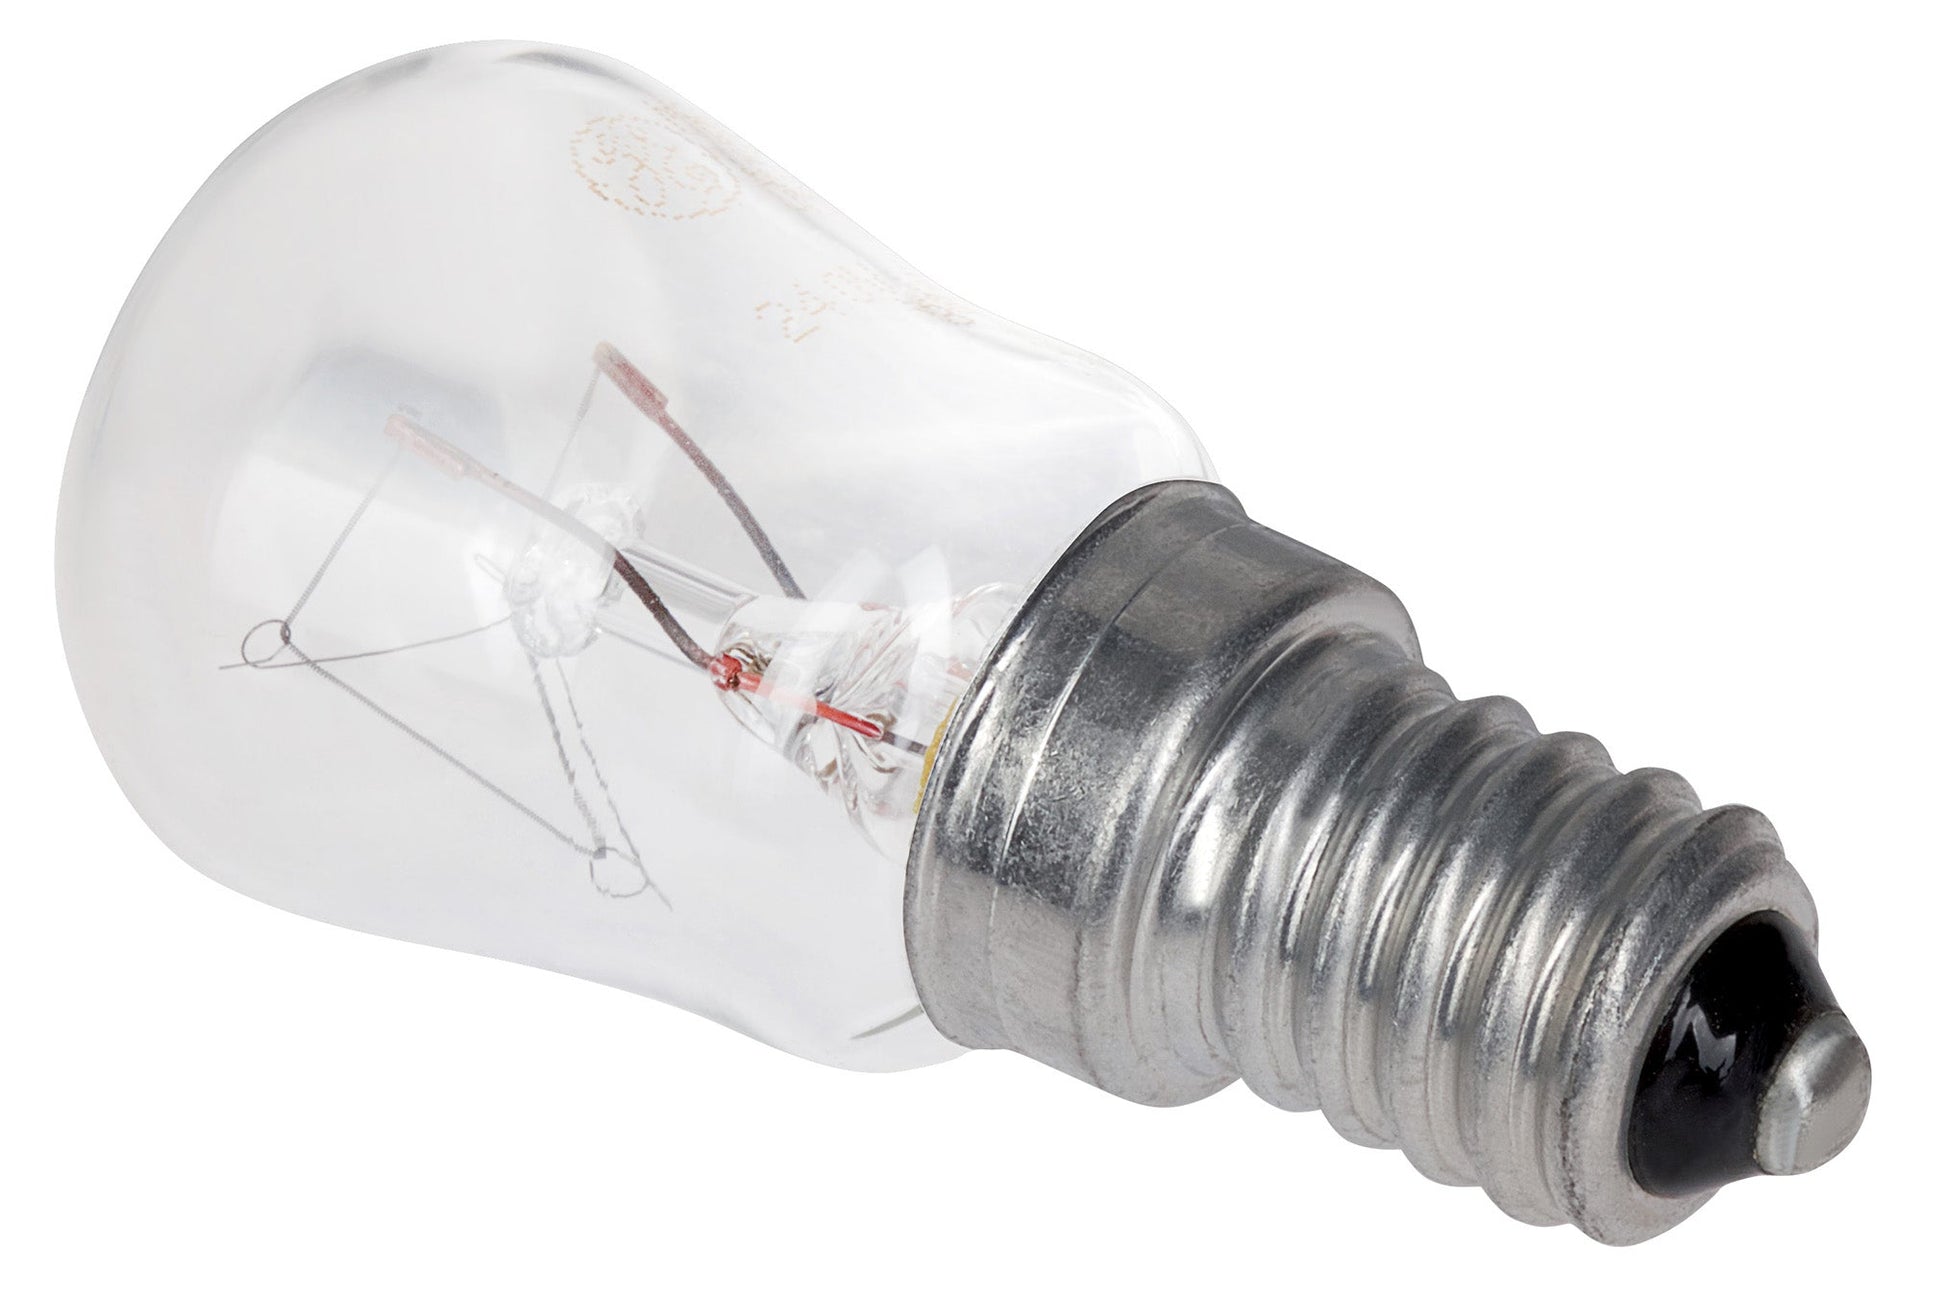 General Electric DS48 SES Pygmy Clear Light Bulb - E14 - maplin.co.uk